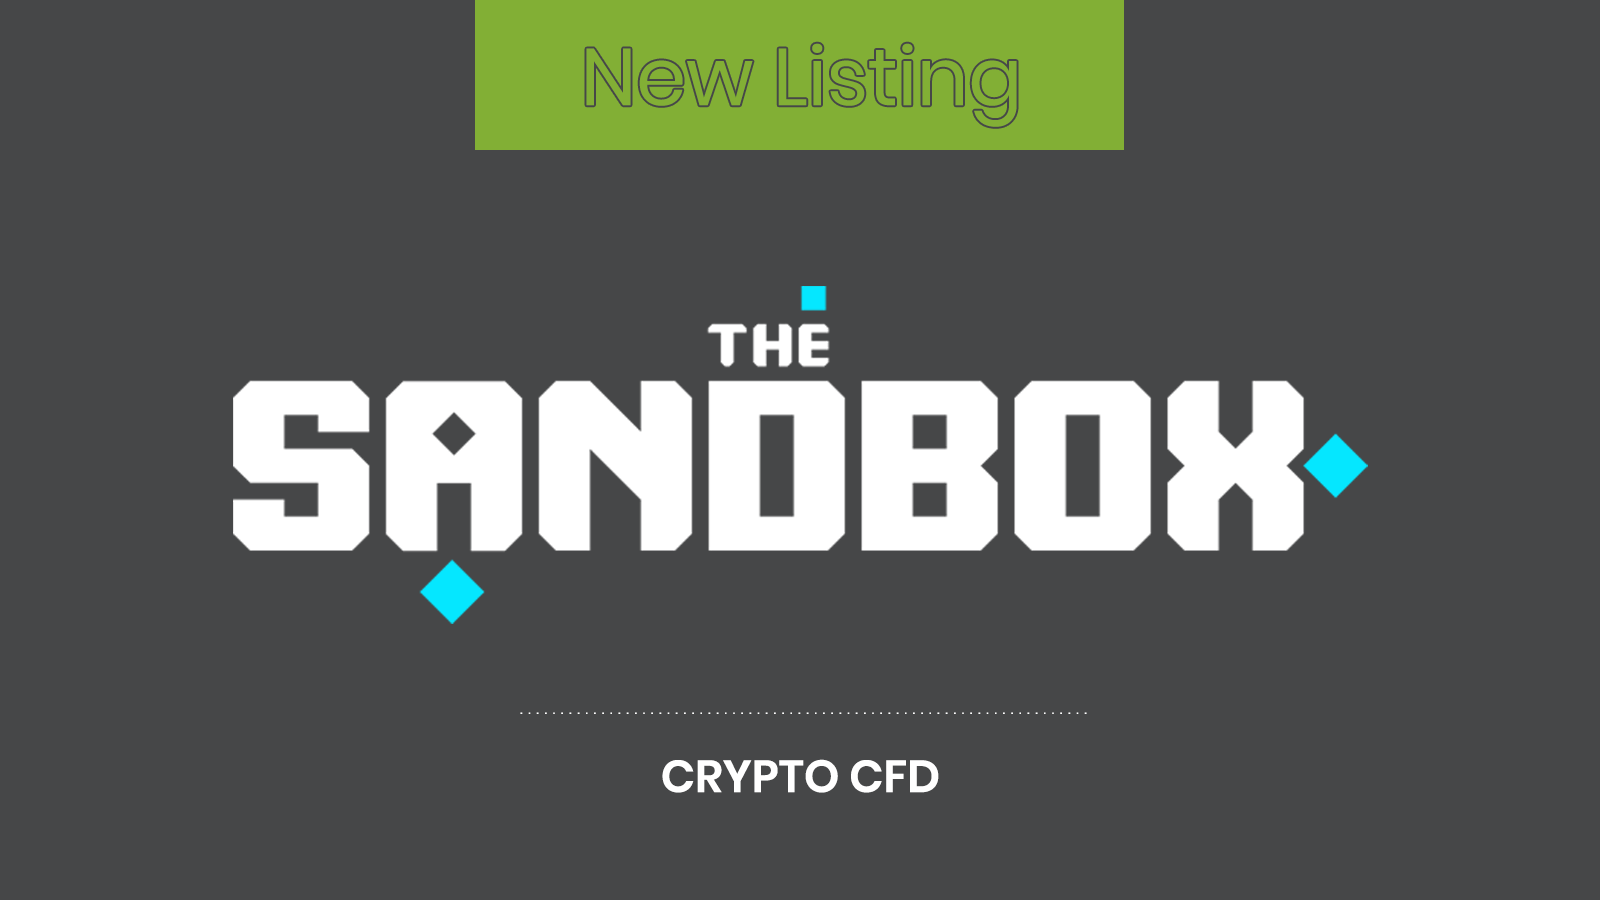 New Listing: The Sandbox (SAND) Crypto CFD is now available to trade on ThinkMarkets